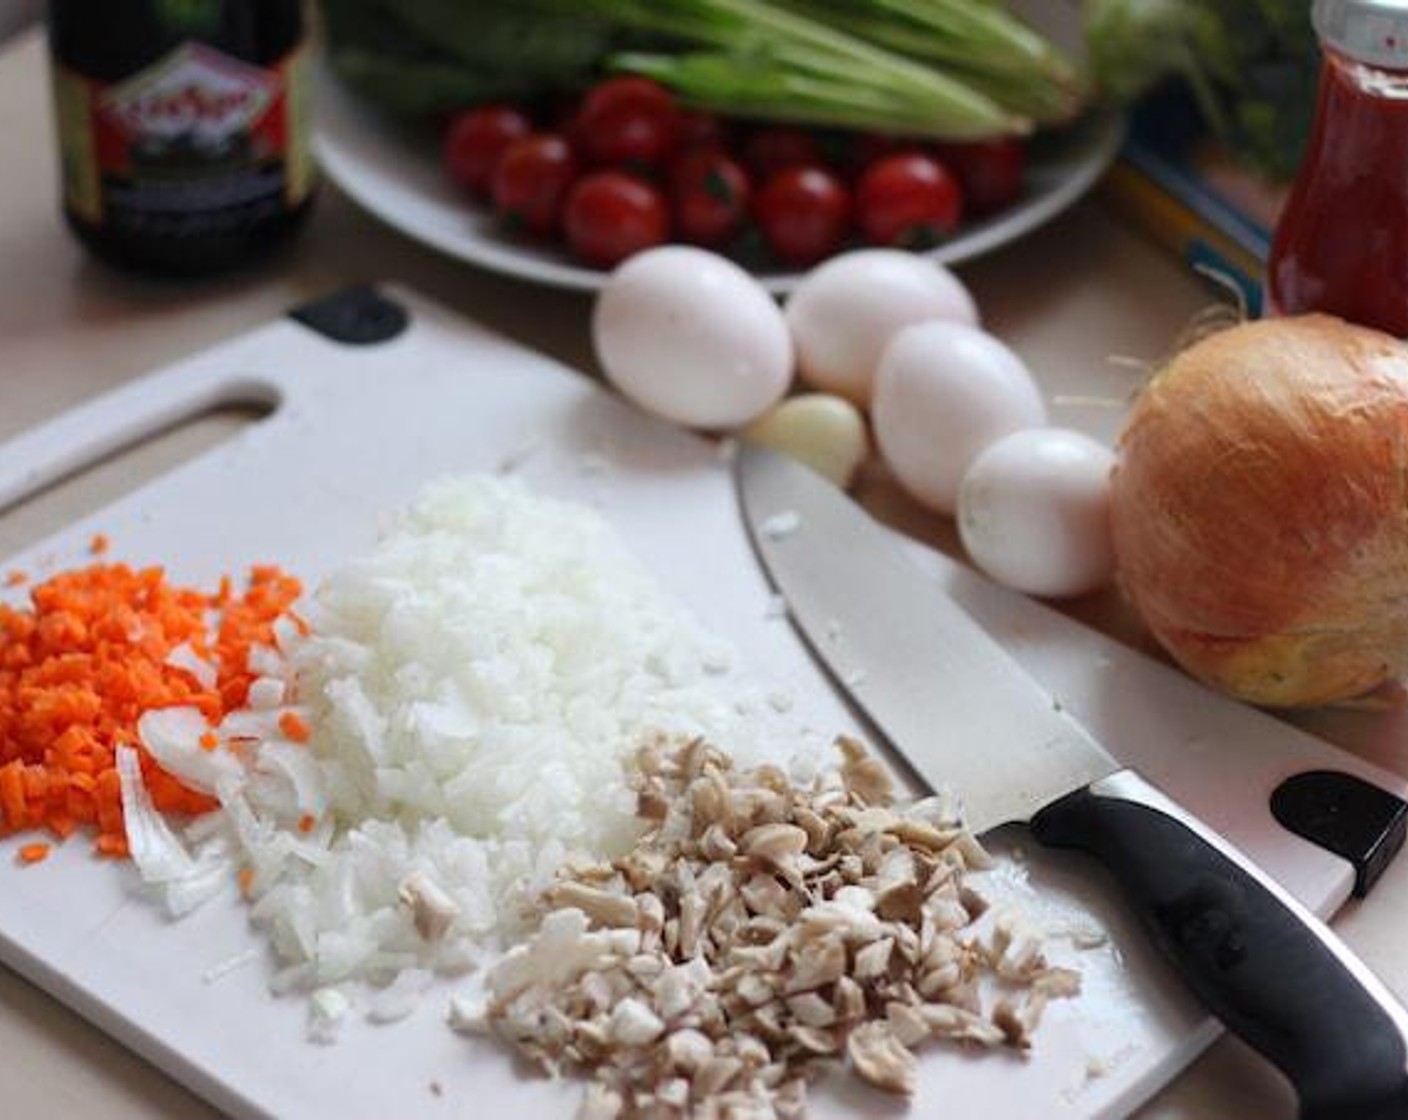 step 1 Prepare White Rice (1 1/2 cups) in a streamer or pan with 3 cups of water. While rice is cooking, start cutting Garlic (1 clove), Carrot (1), Onions (to taste), and Beech Mushrooms (1 cup) as small as possible.